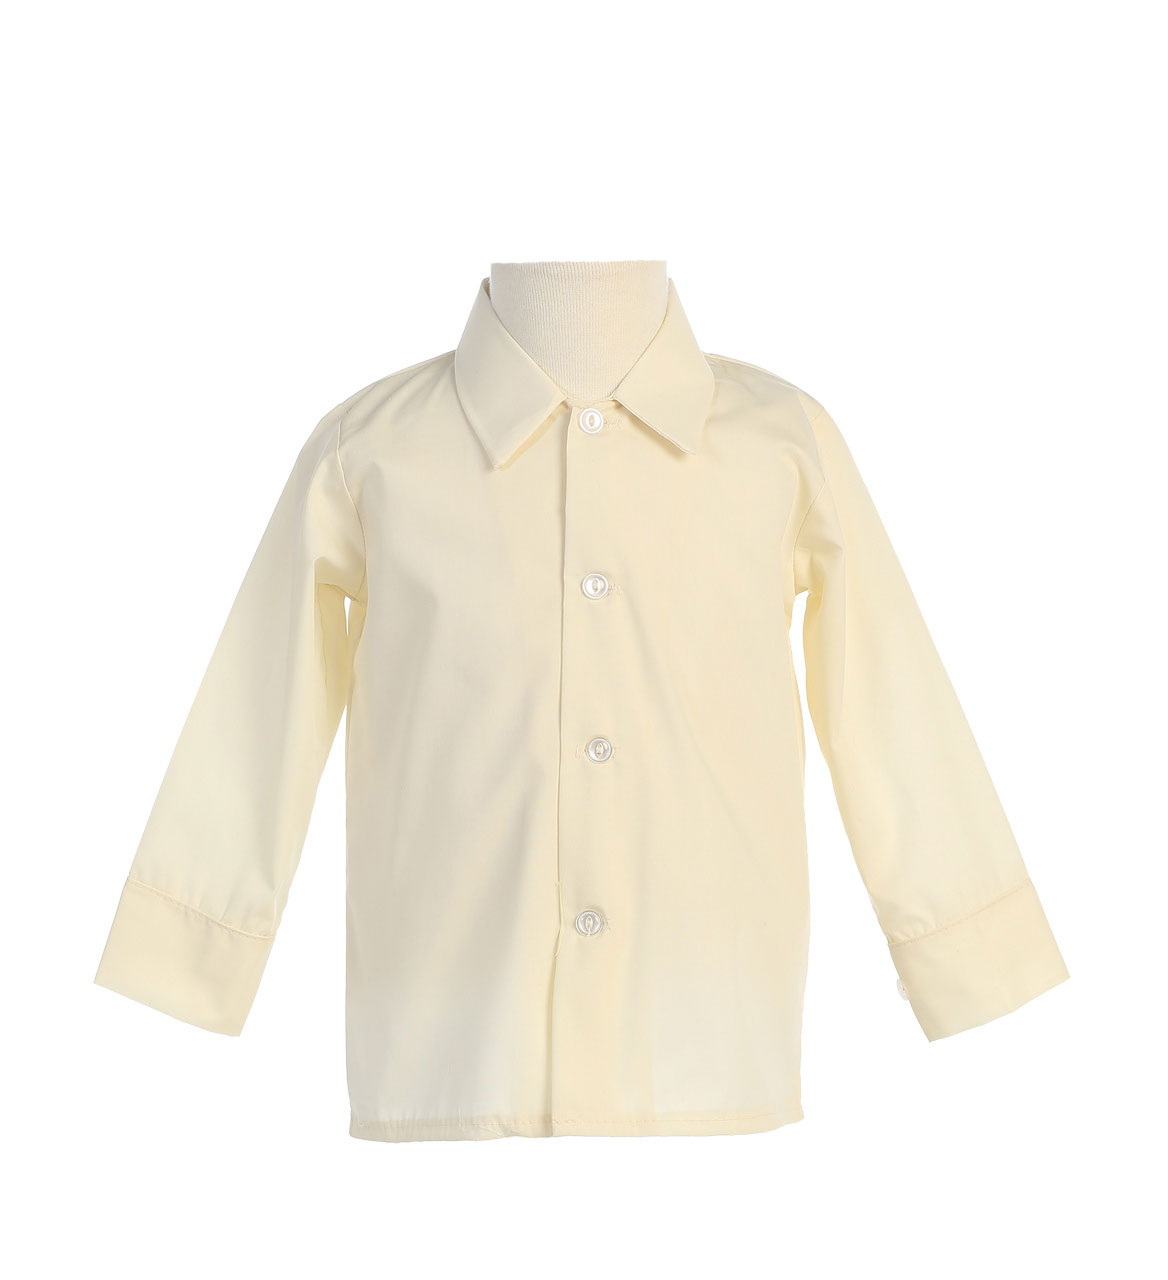 Boys Long Sleeved Simple Dress Shirt - Available in White or Ivory